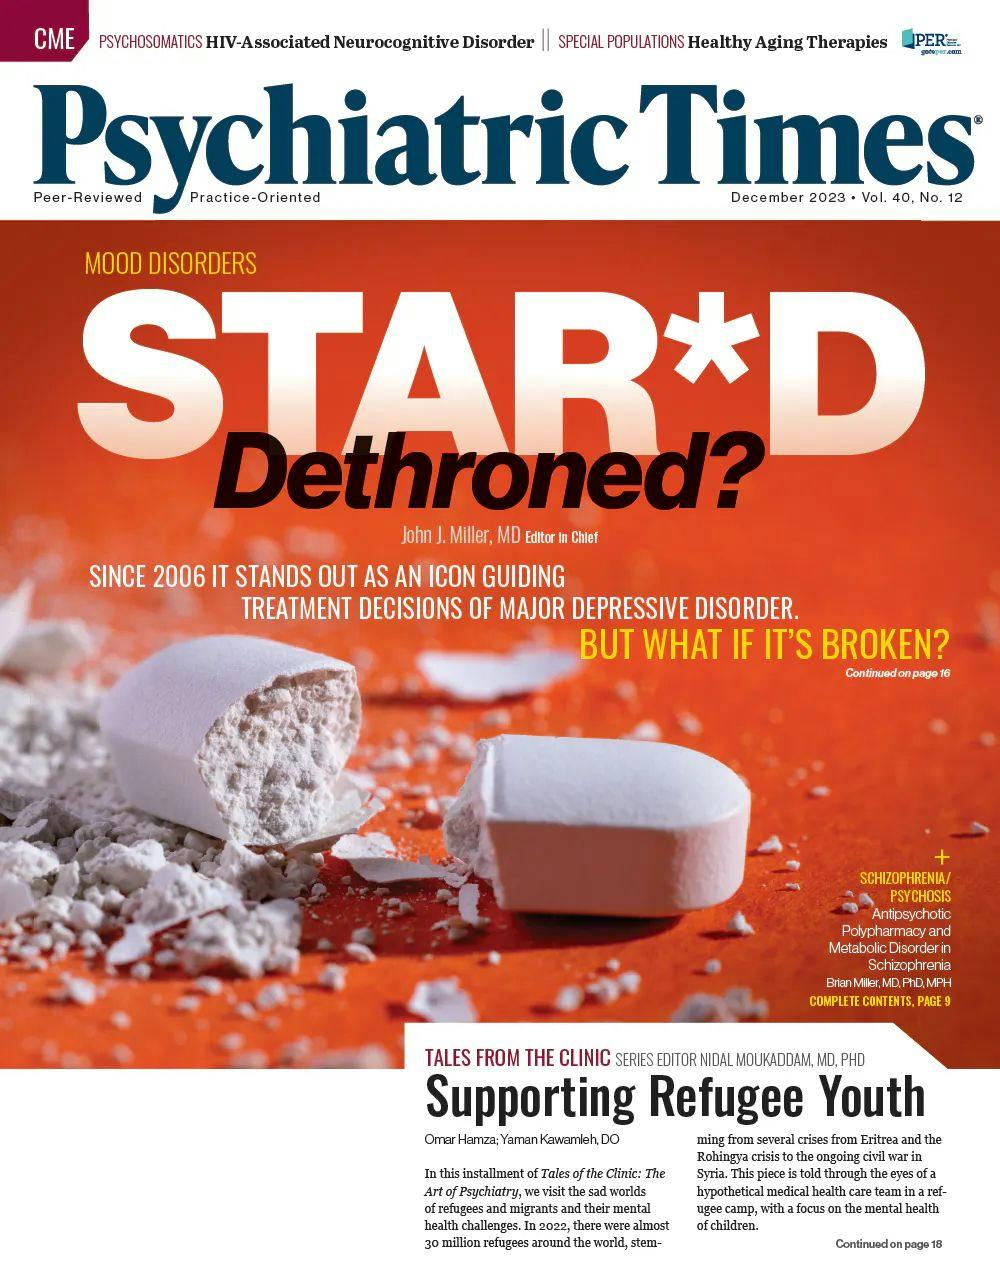 The experts weighed in on a wide variety of psychiatric issues for the December 2023 issue of Psychiatric Times.